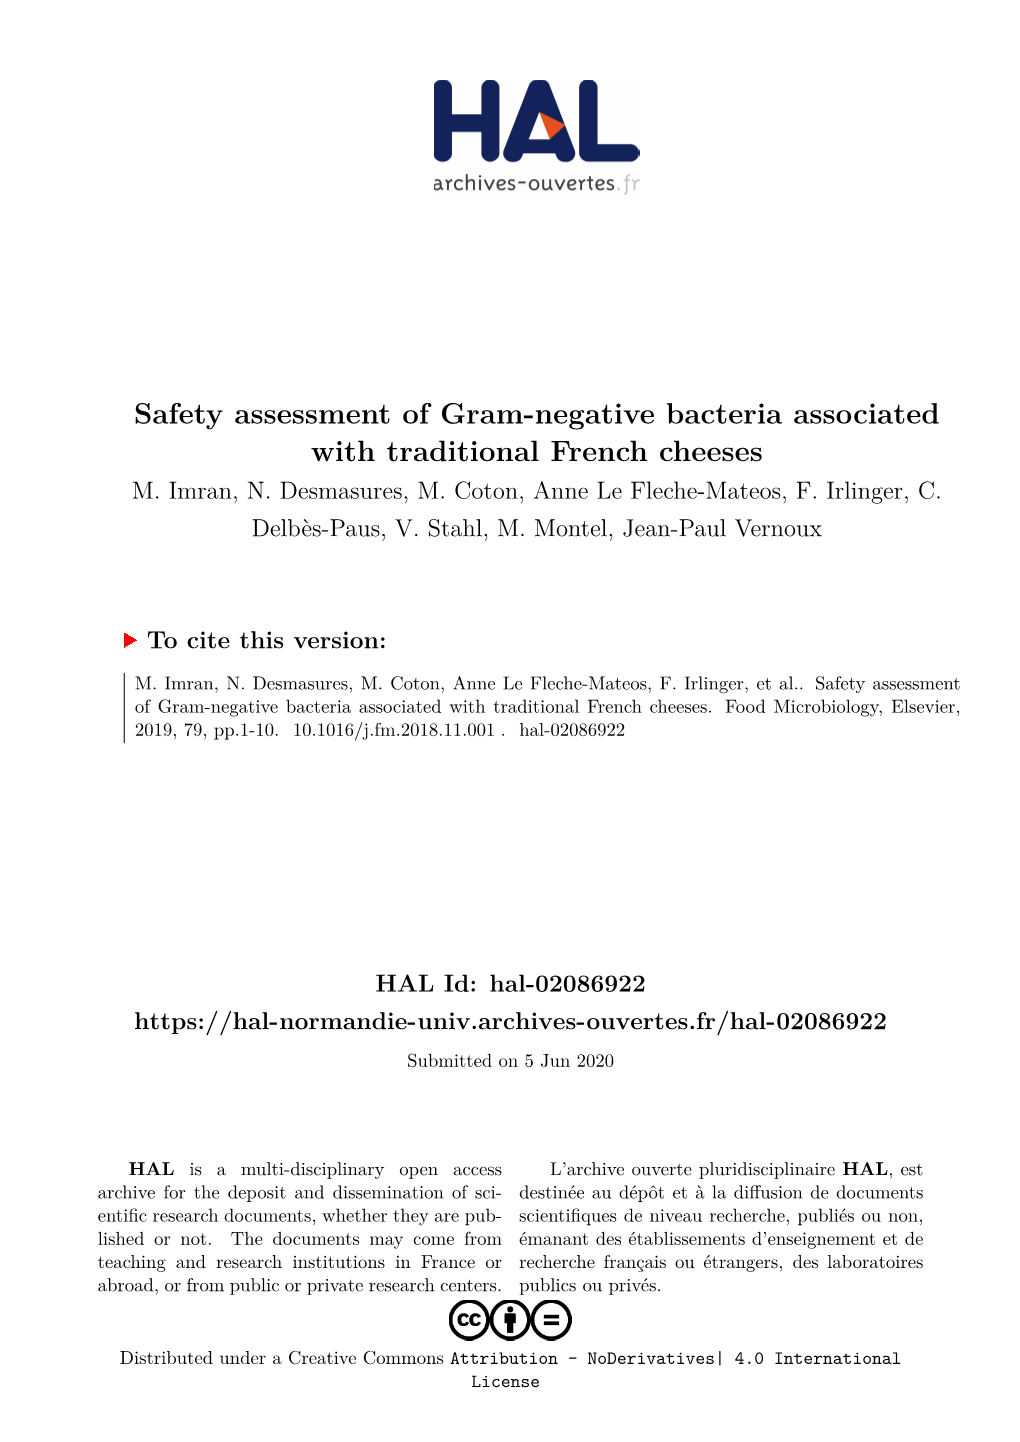 Safety Assessment of Gram-Negative Bacteria Associated with Traditional French Cheeses M